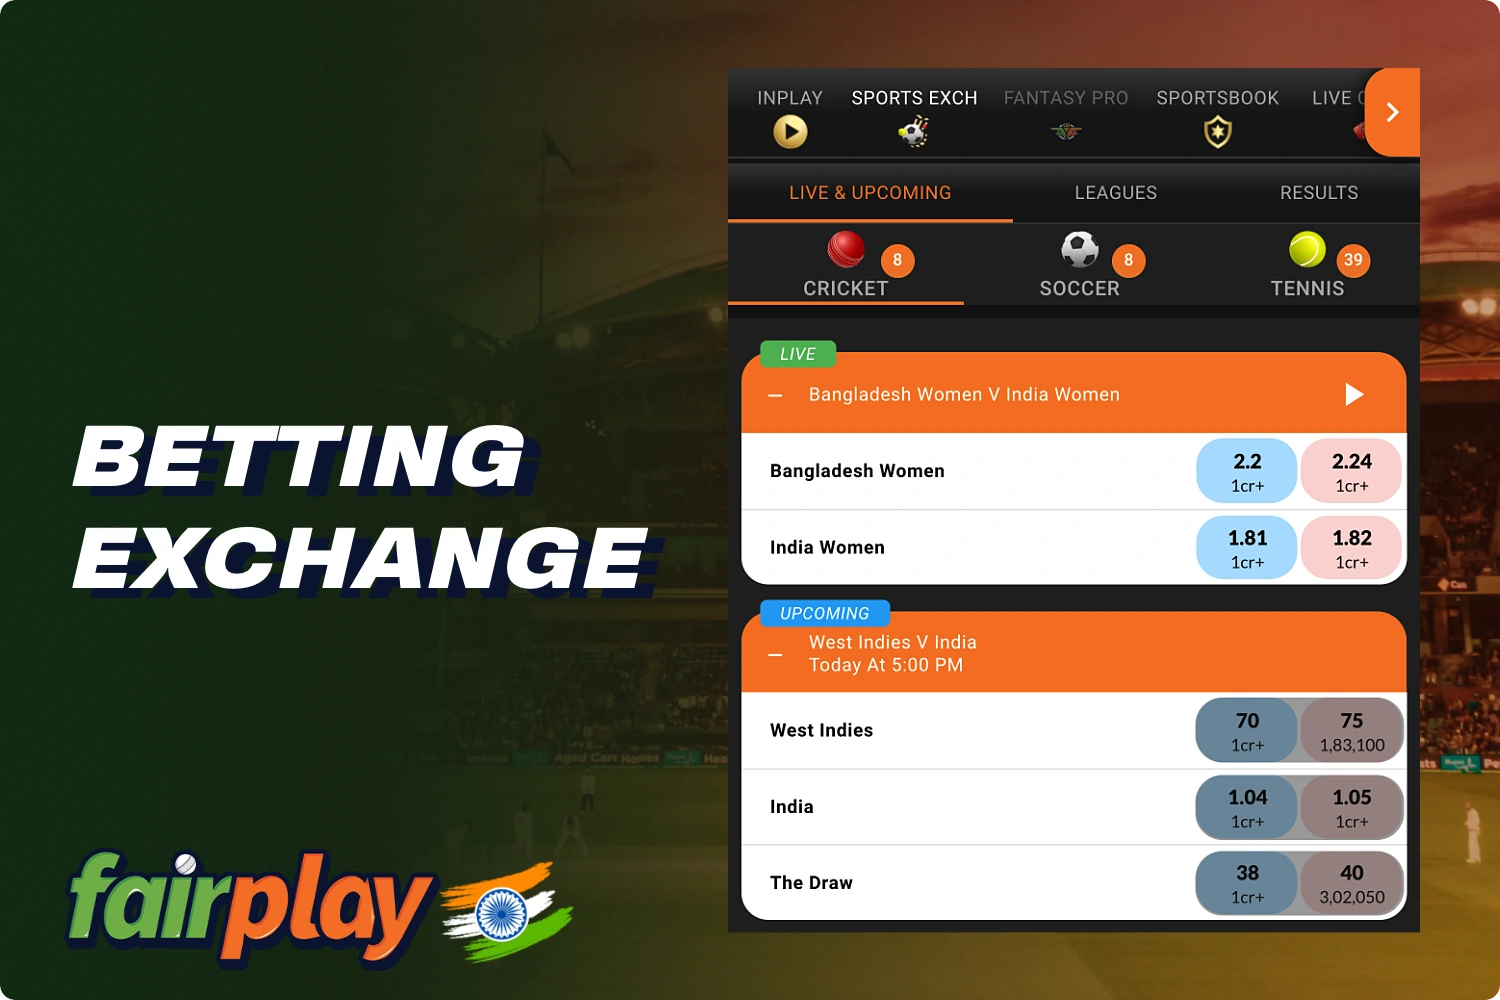 Betting Exchange in Fairplay allows you to bet not against the bookmaker, but against other users